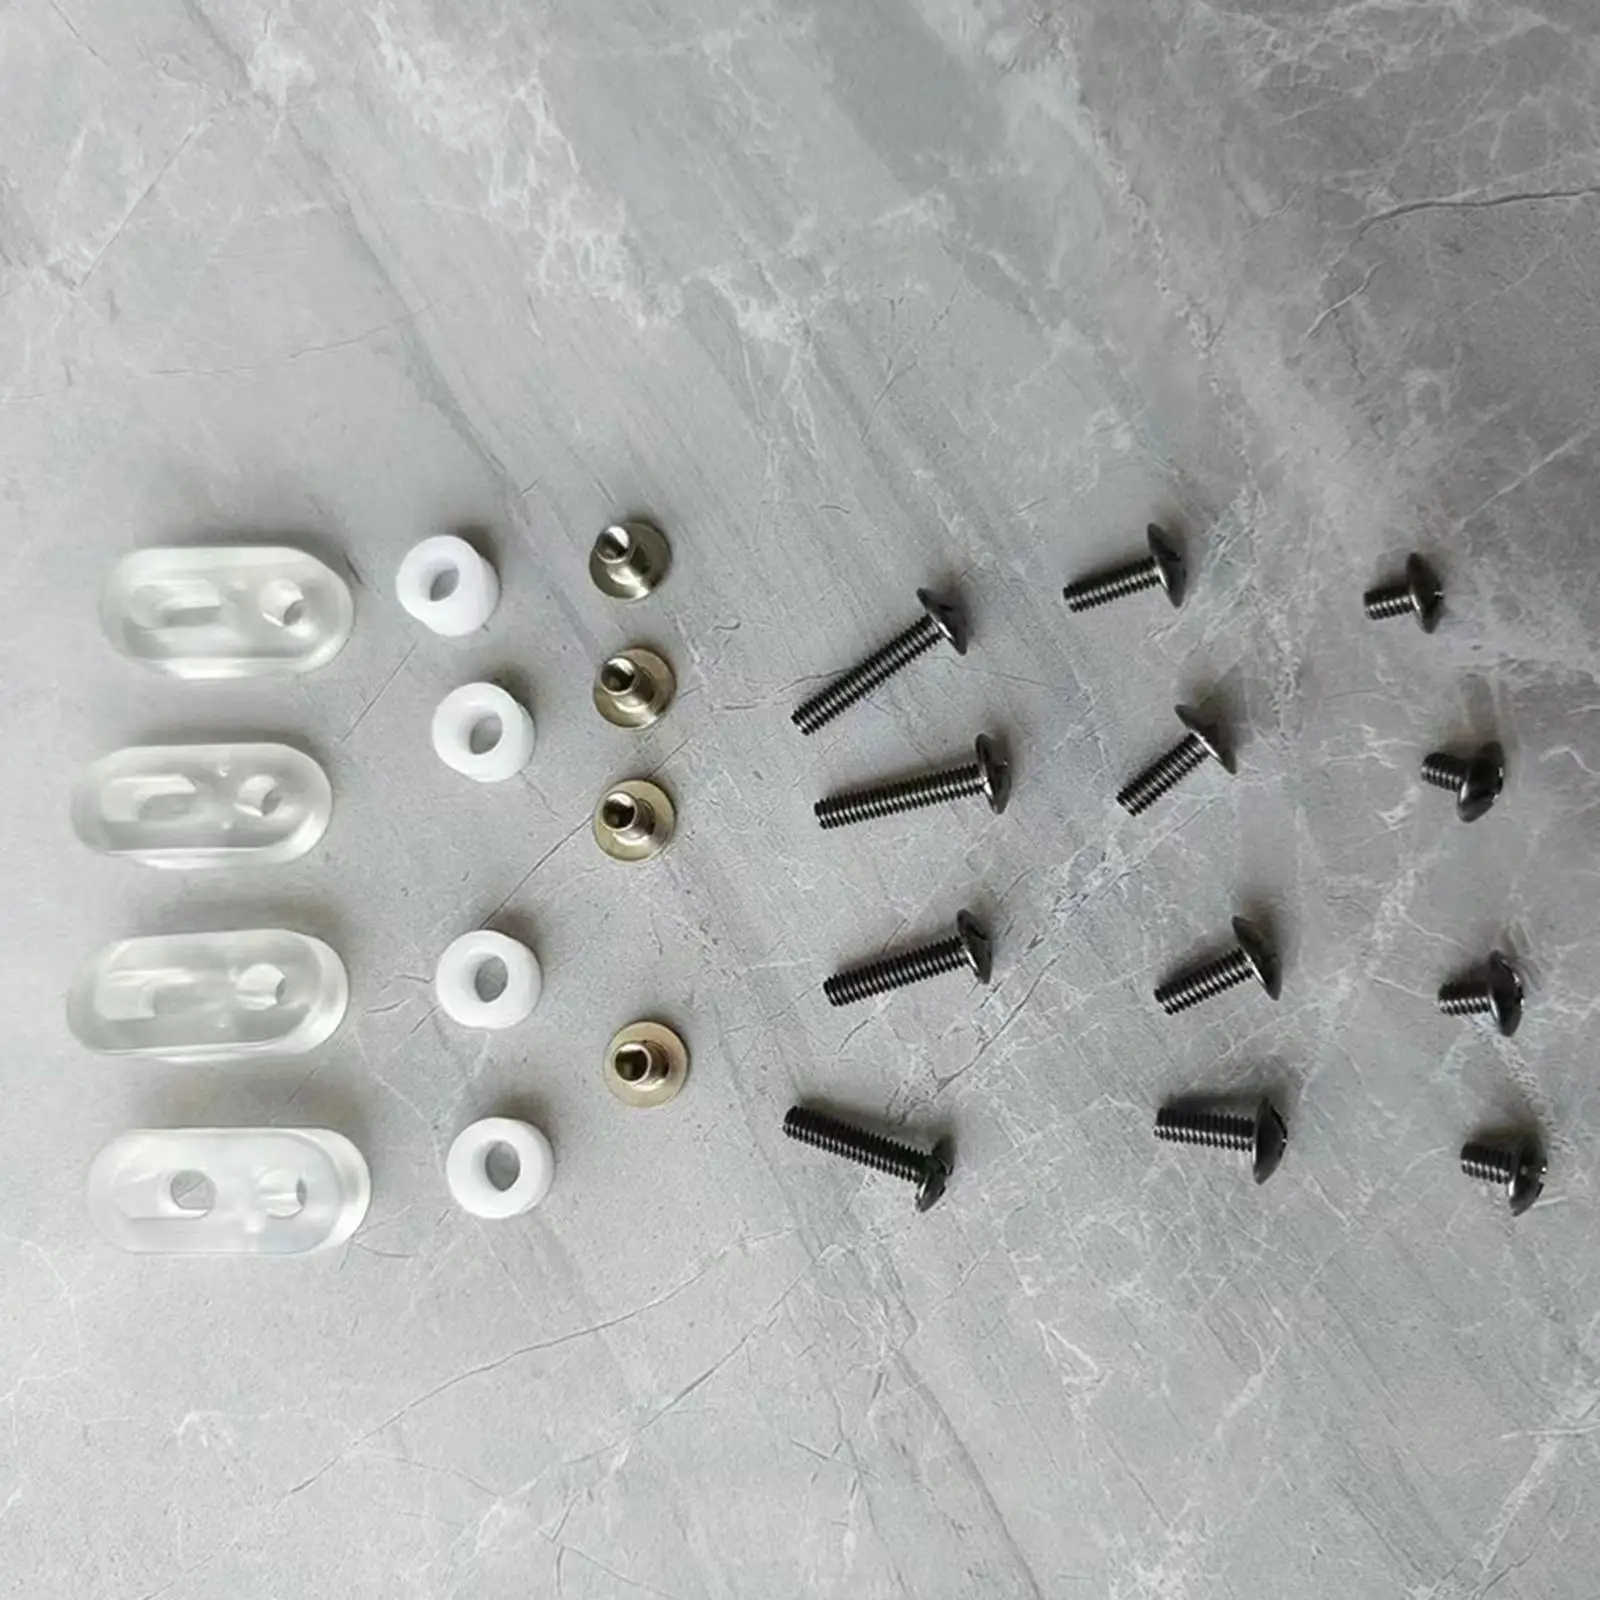 Ice Hockey Visor Hardware Kit Screw Washers Nuts Replacement Safety Hockey Equipment Accessories Fixings Back up Hardwares